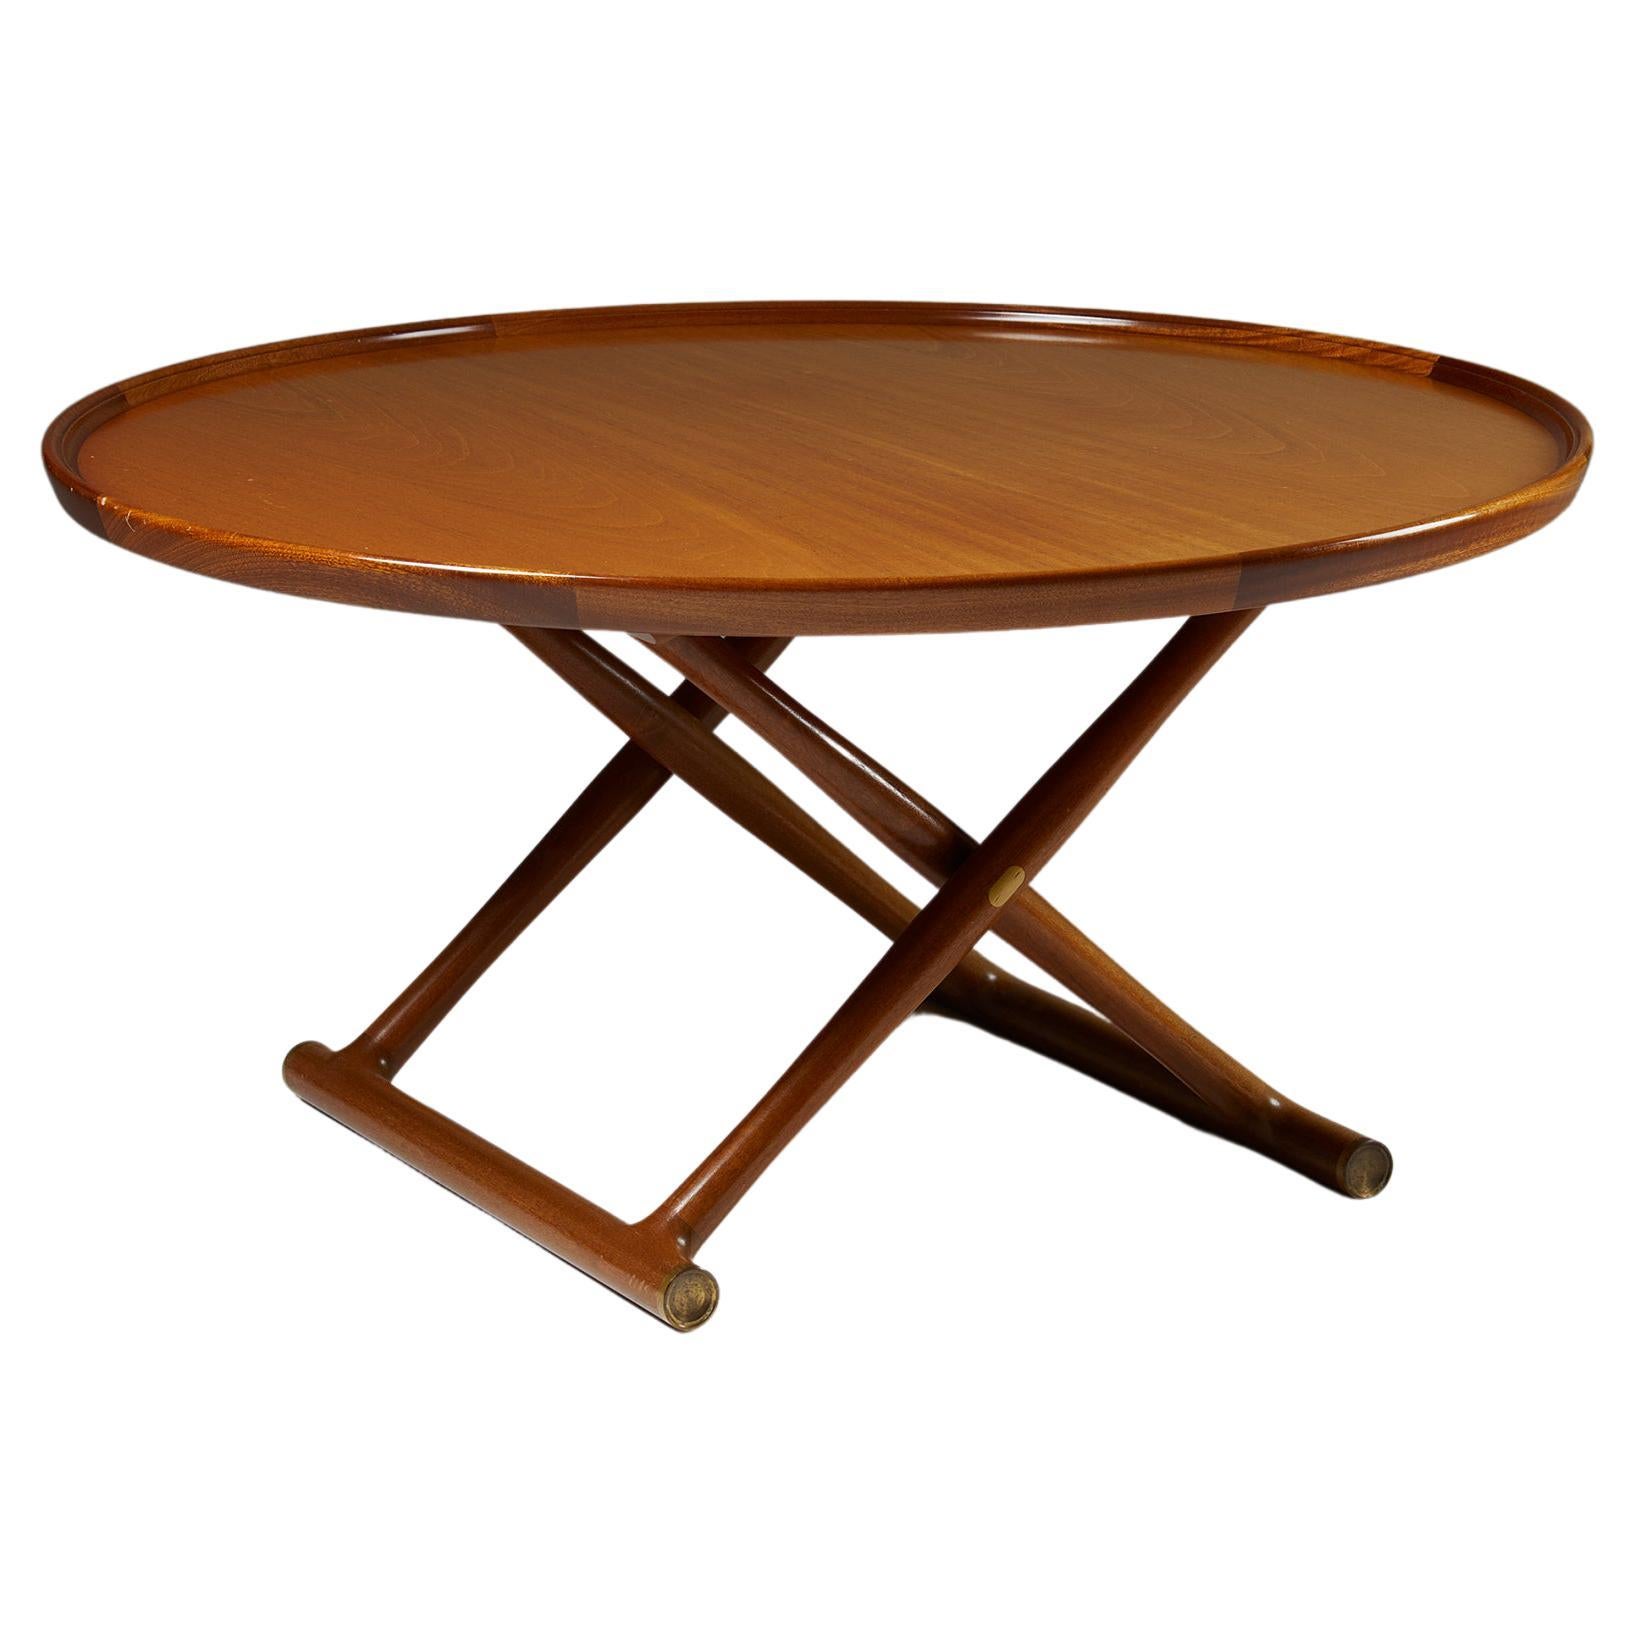 Occasional Table “Egyptian” Designed by Mogens Lassen for Rud. Rasmussen  For Sale at 1stDibs